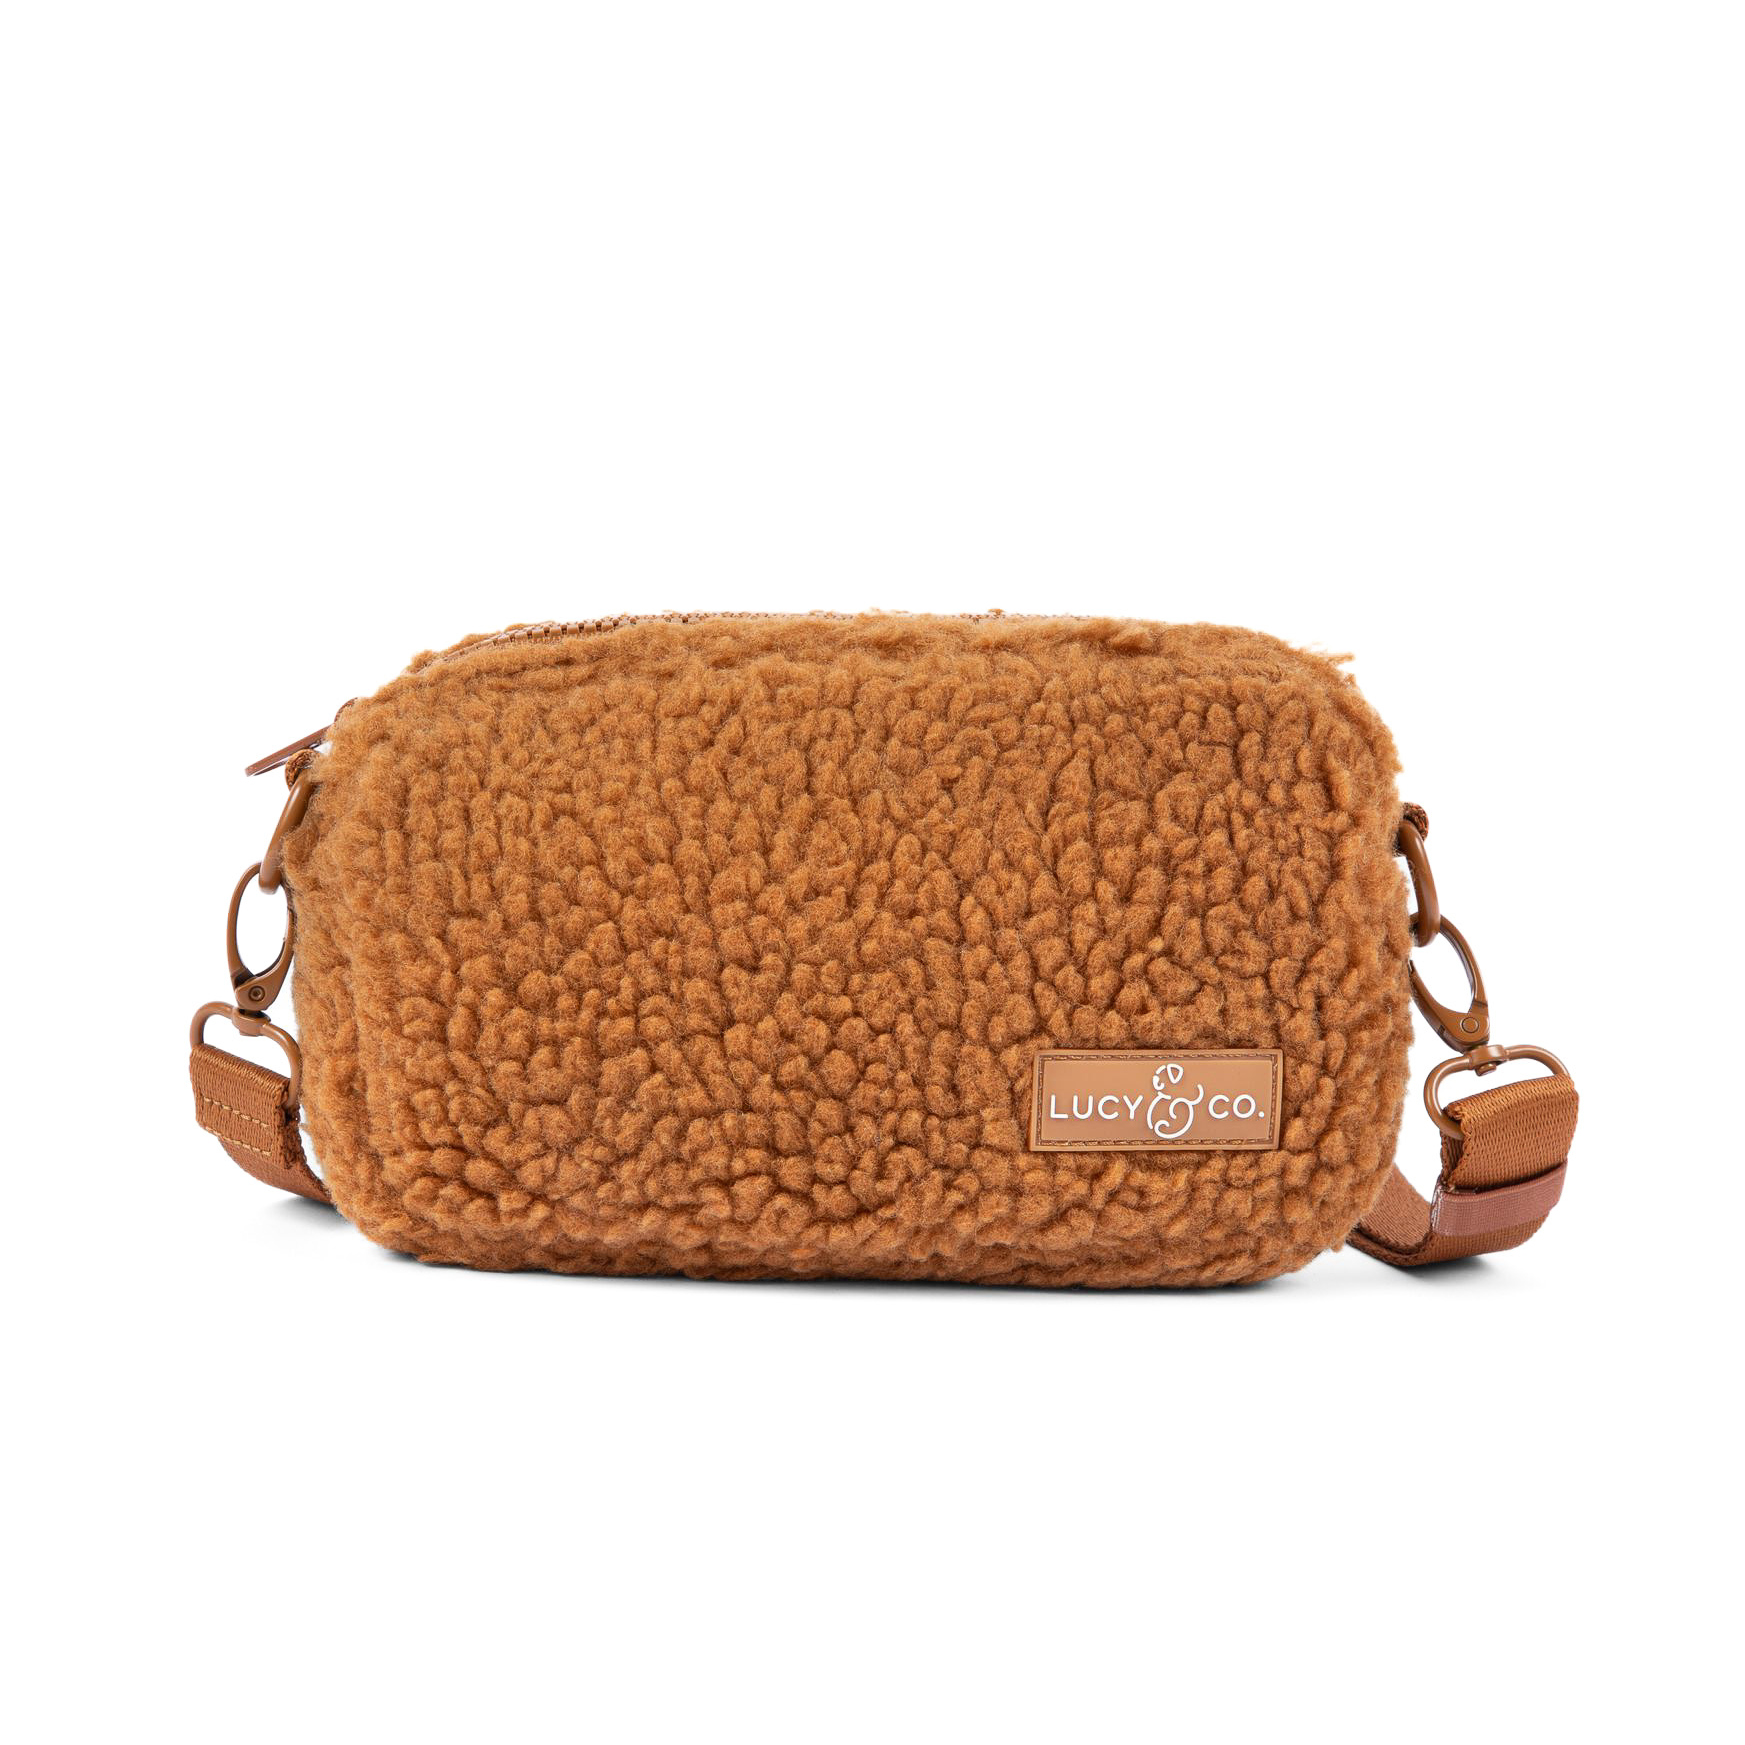 Sherpa Bum Bags are here! This ultra adjustable style fits up to a